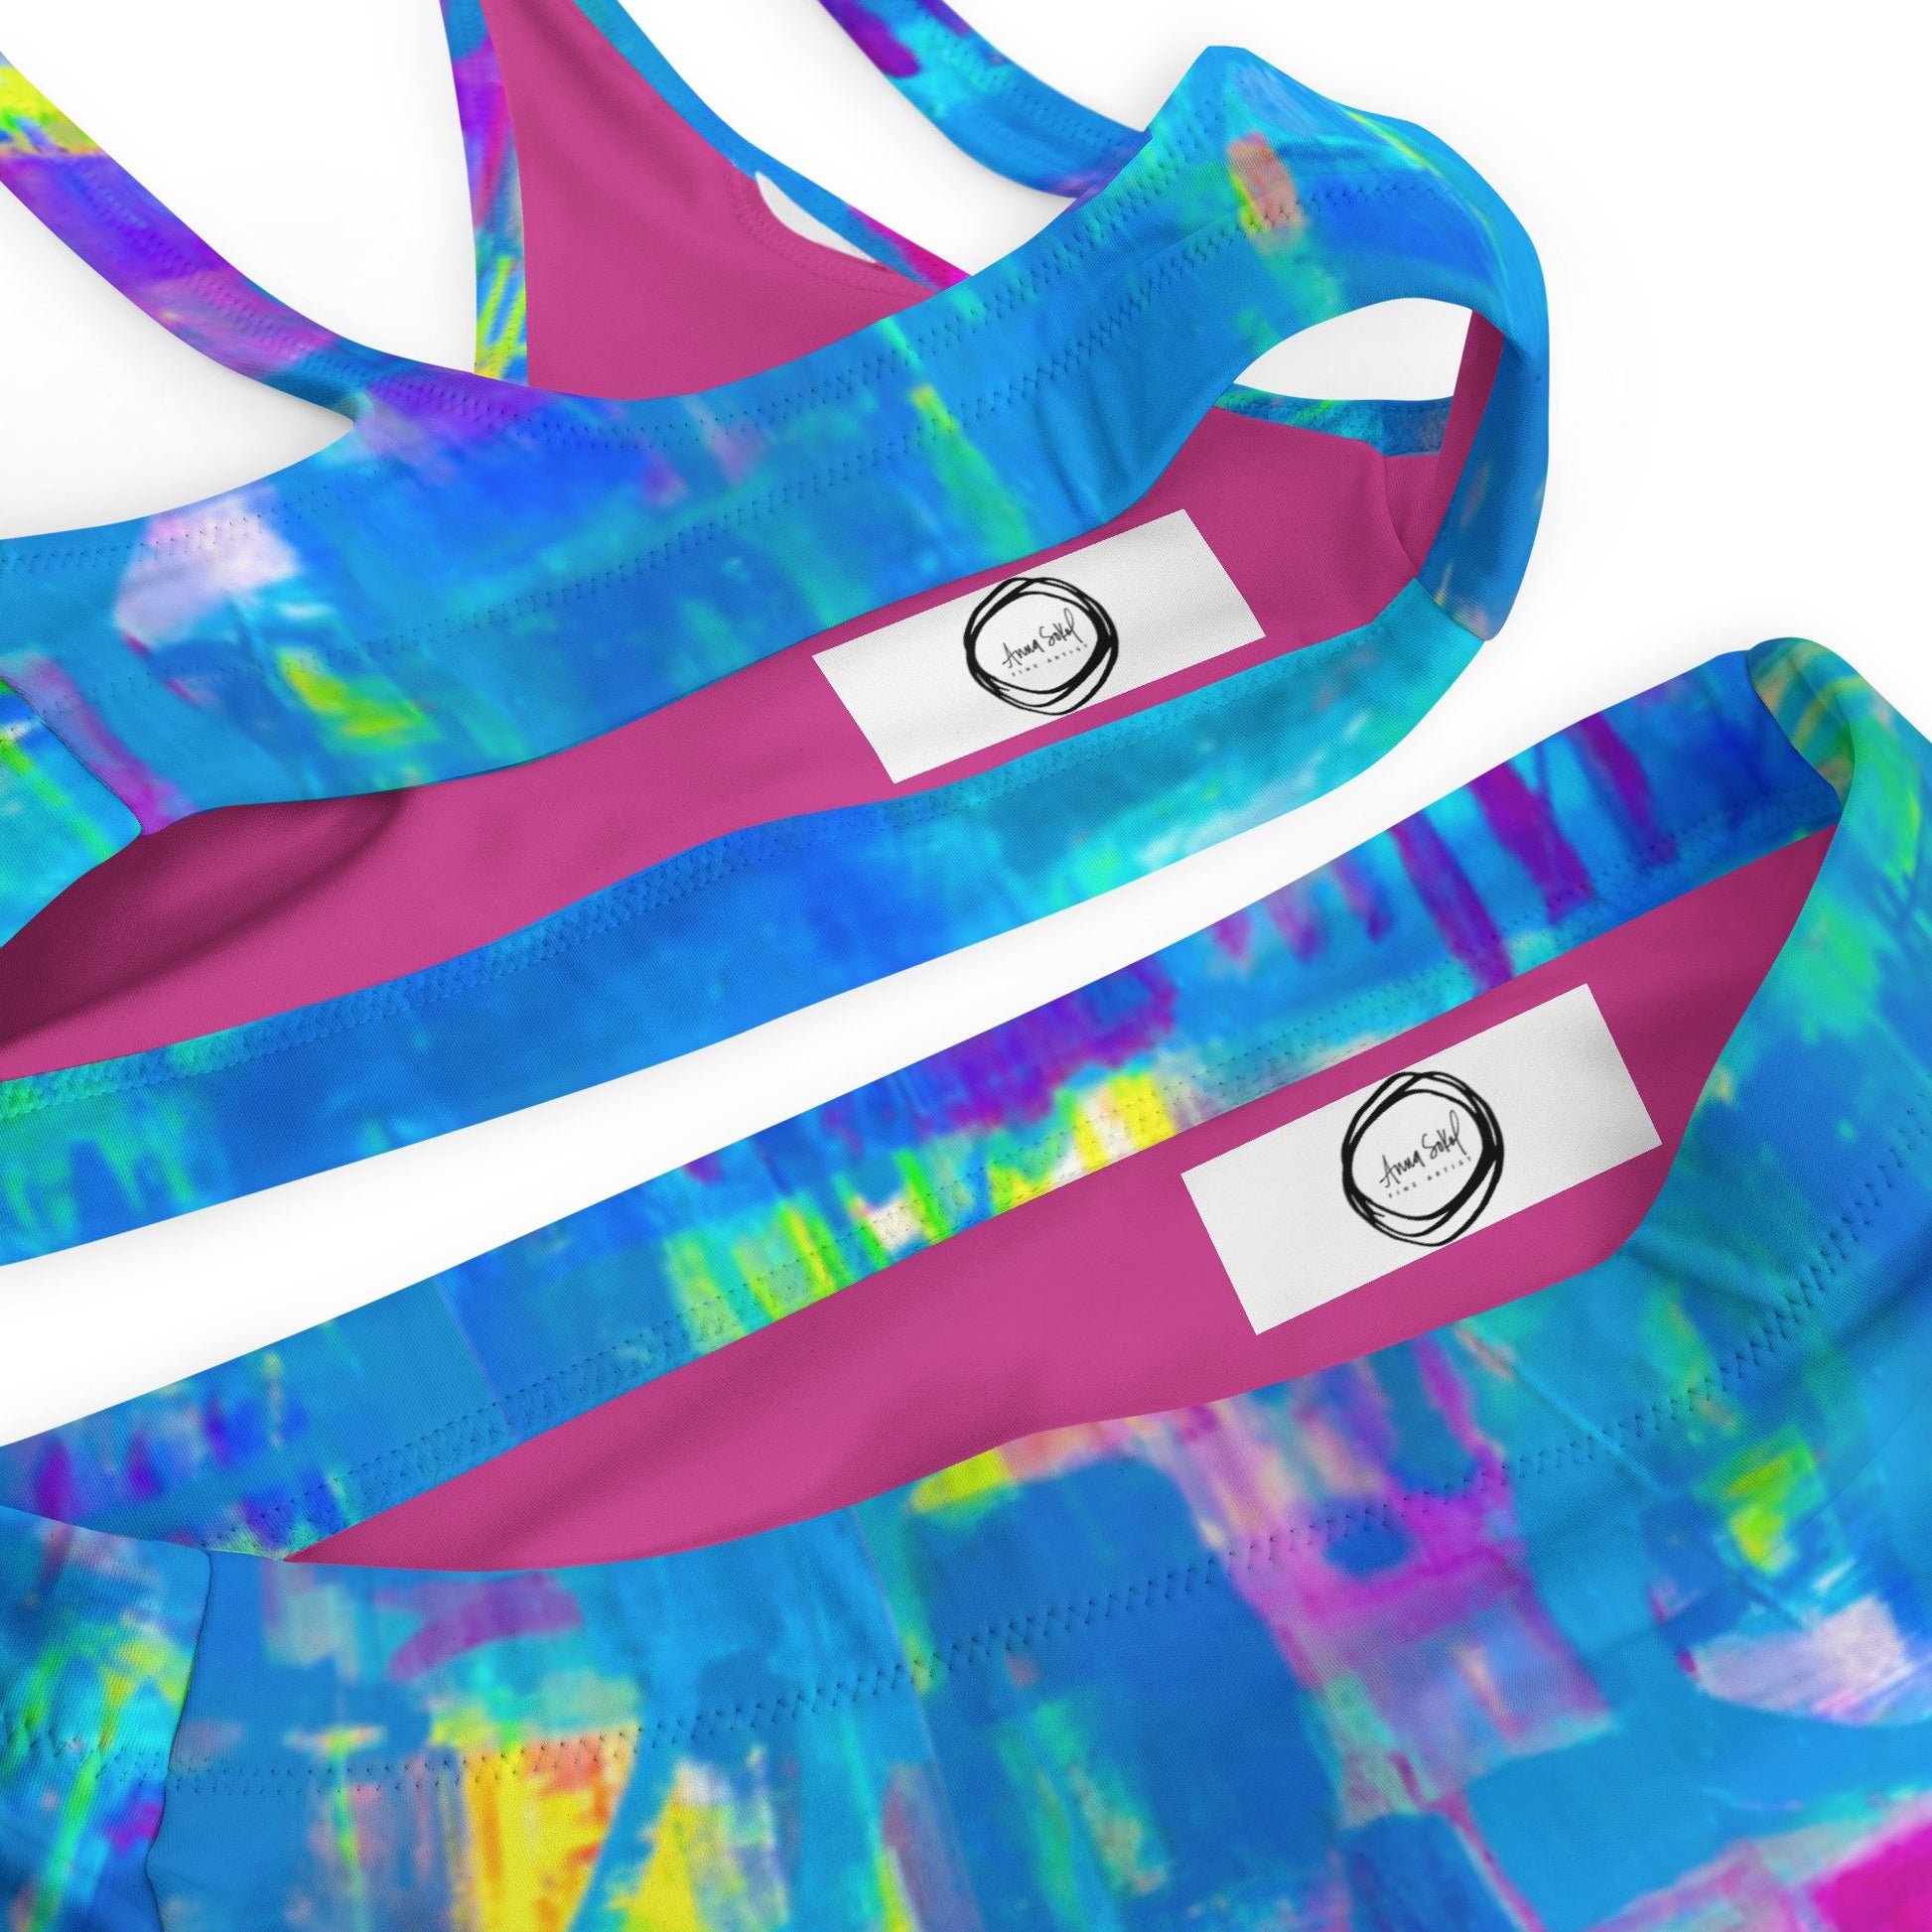 Coloring The Motion - Recycled high-waisted bikini